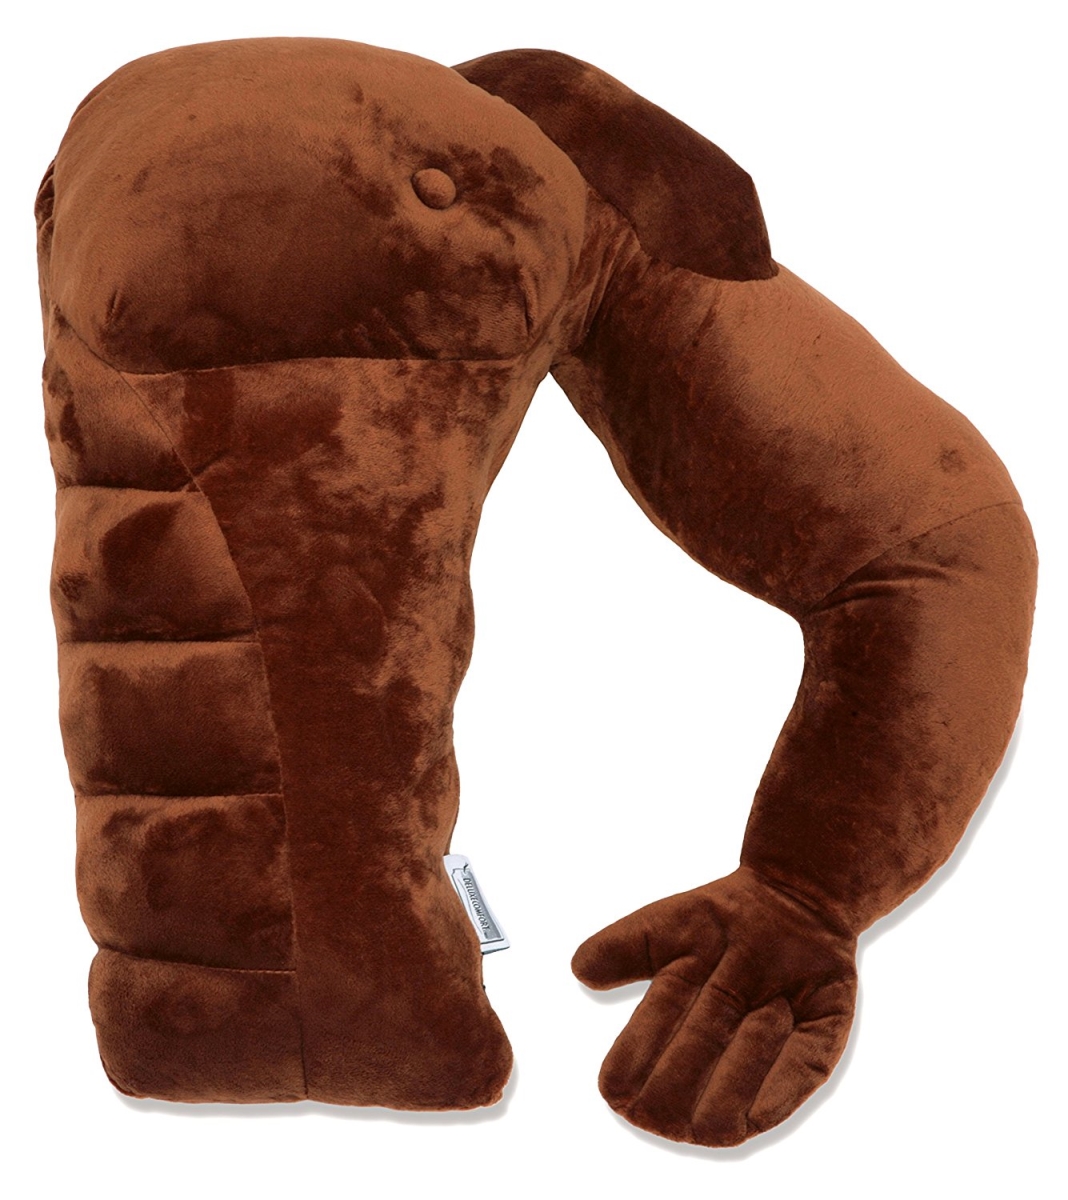 Picture of Living Health Products BFPB-MUS-BRWMA Boyfriend Pillow - Brown Man - Boyfriend Muscle Man Arm Plush Cotton Pillow - Brawny & Strong